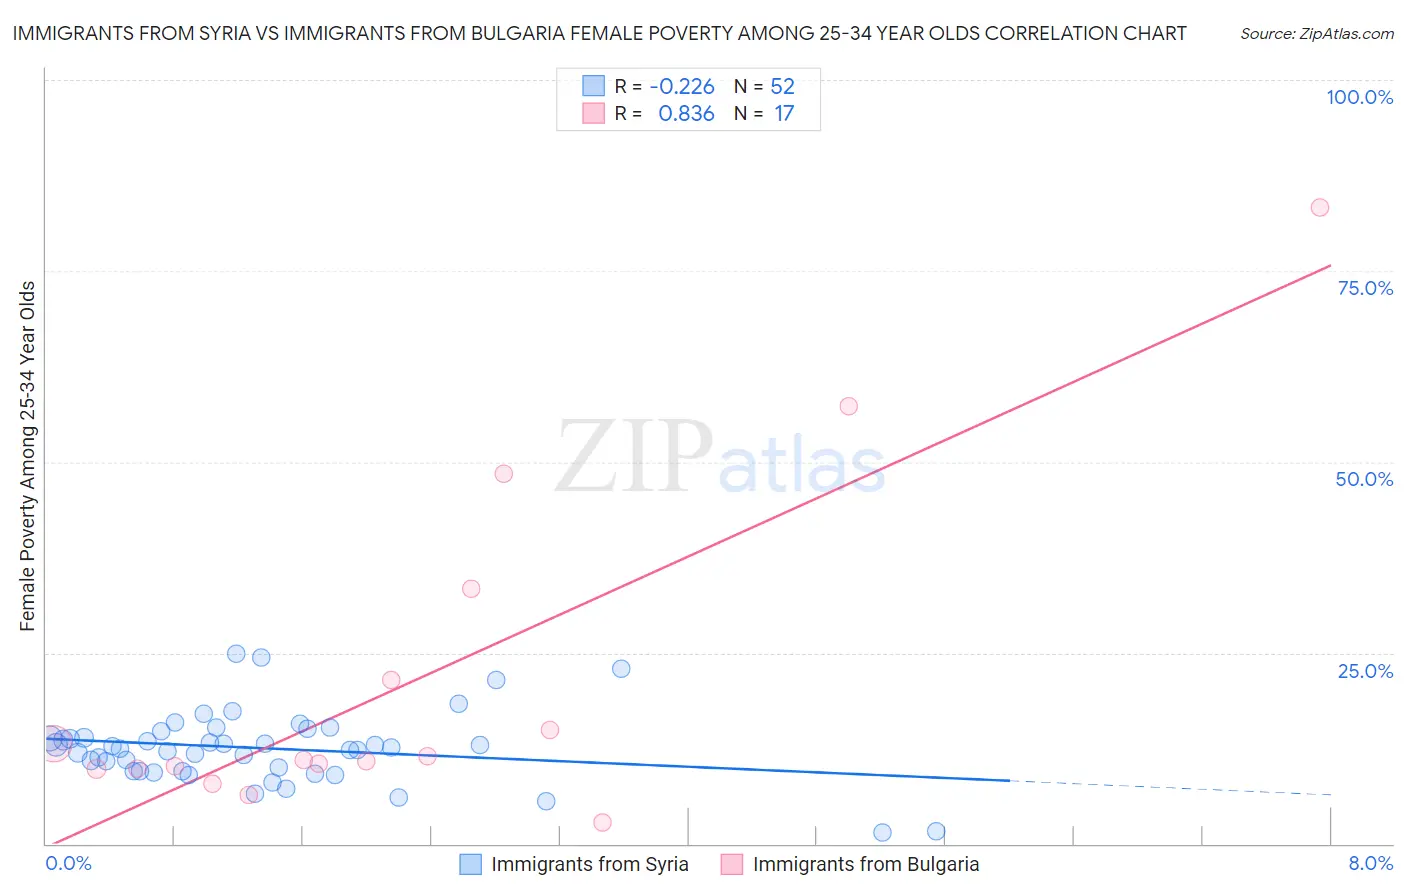 Immigrants from Syria vs Immigrants from Bulgaria Female Poverty Among 25-34 Year Olds